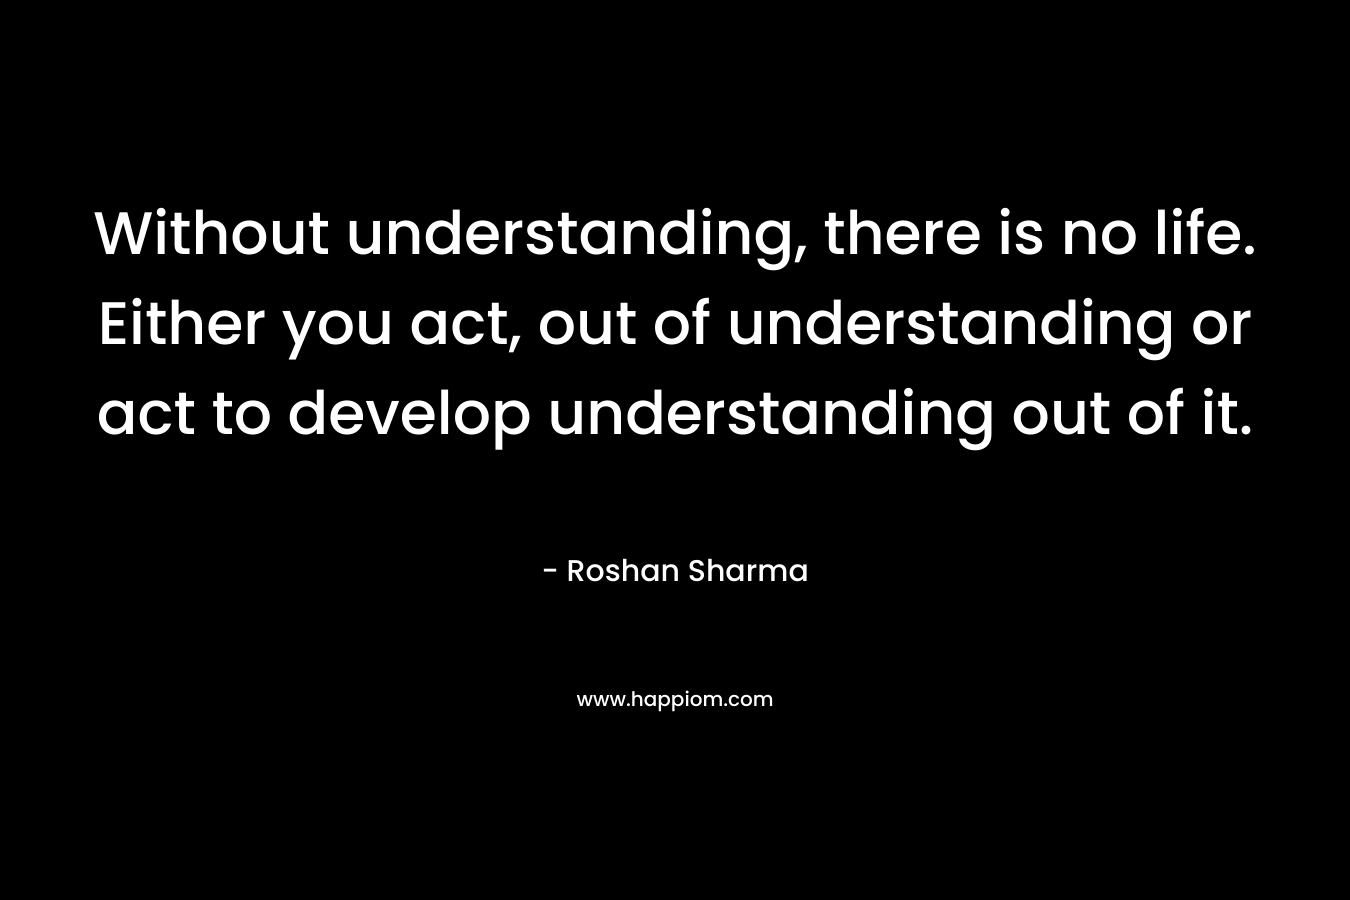 Without understanding, there is no life. Either you act, out of understanding or act to develop understanding out of it.